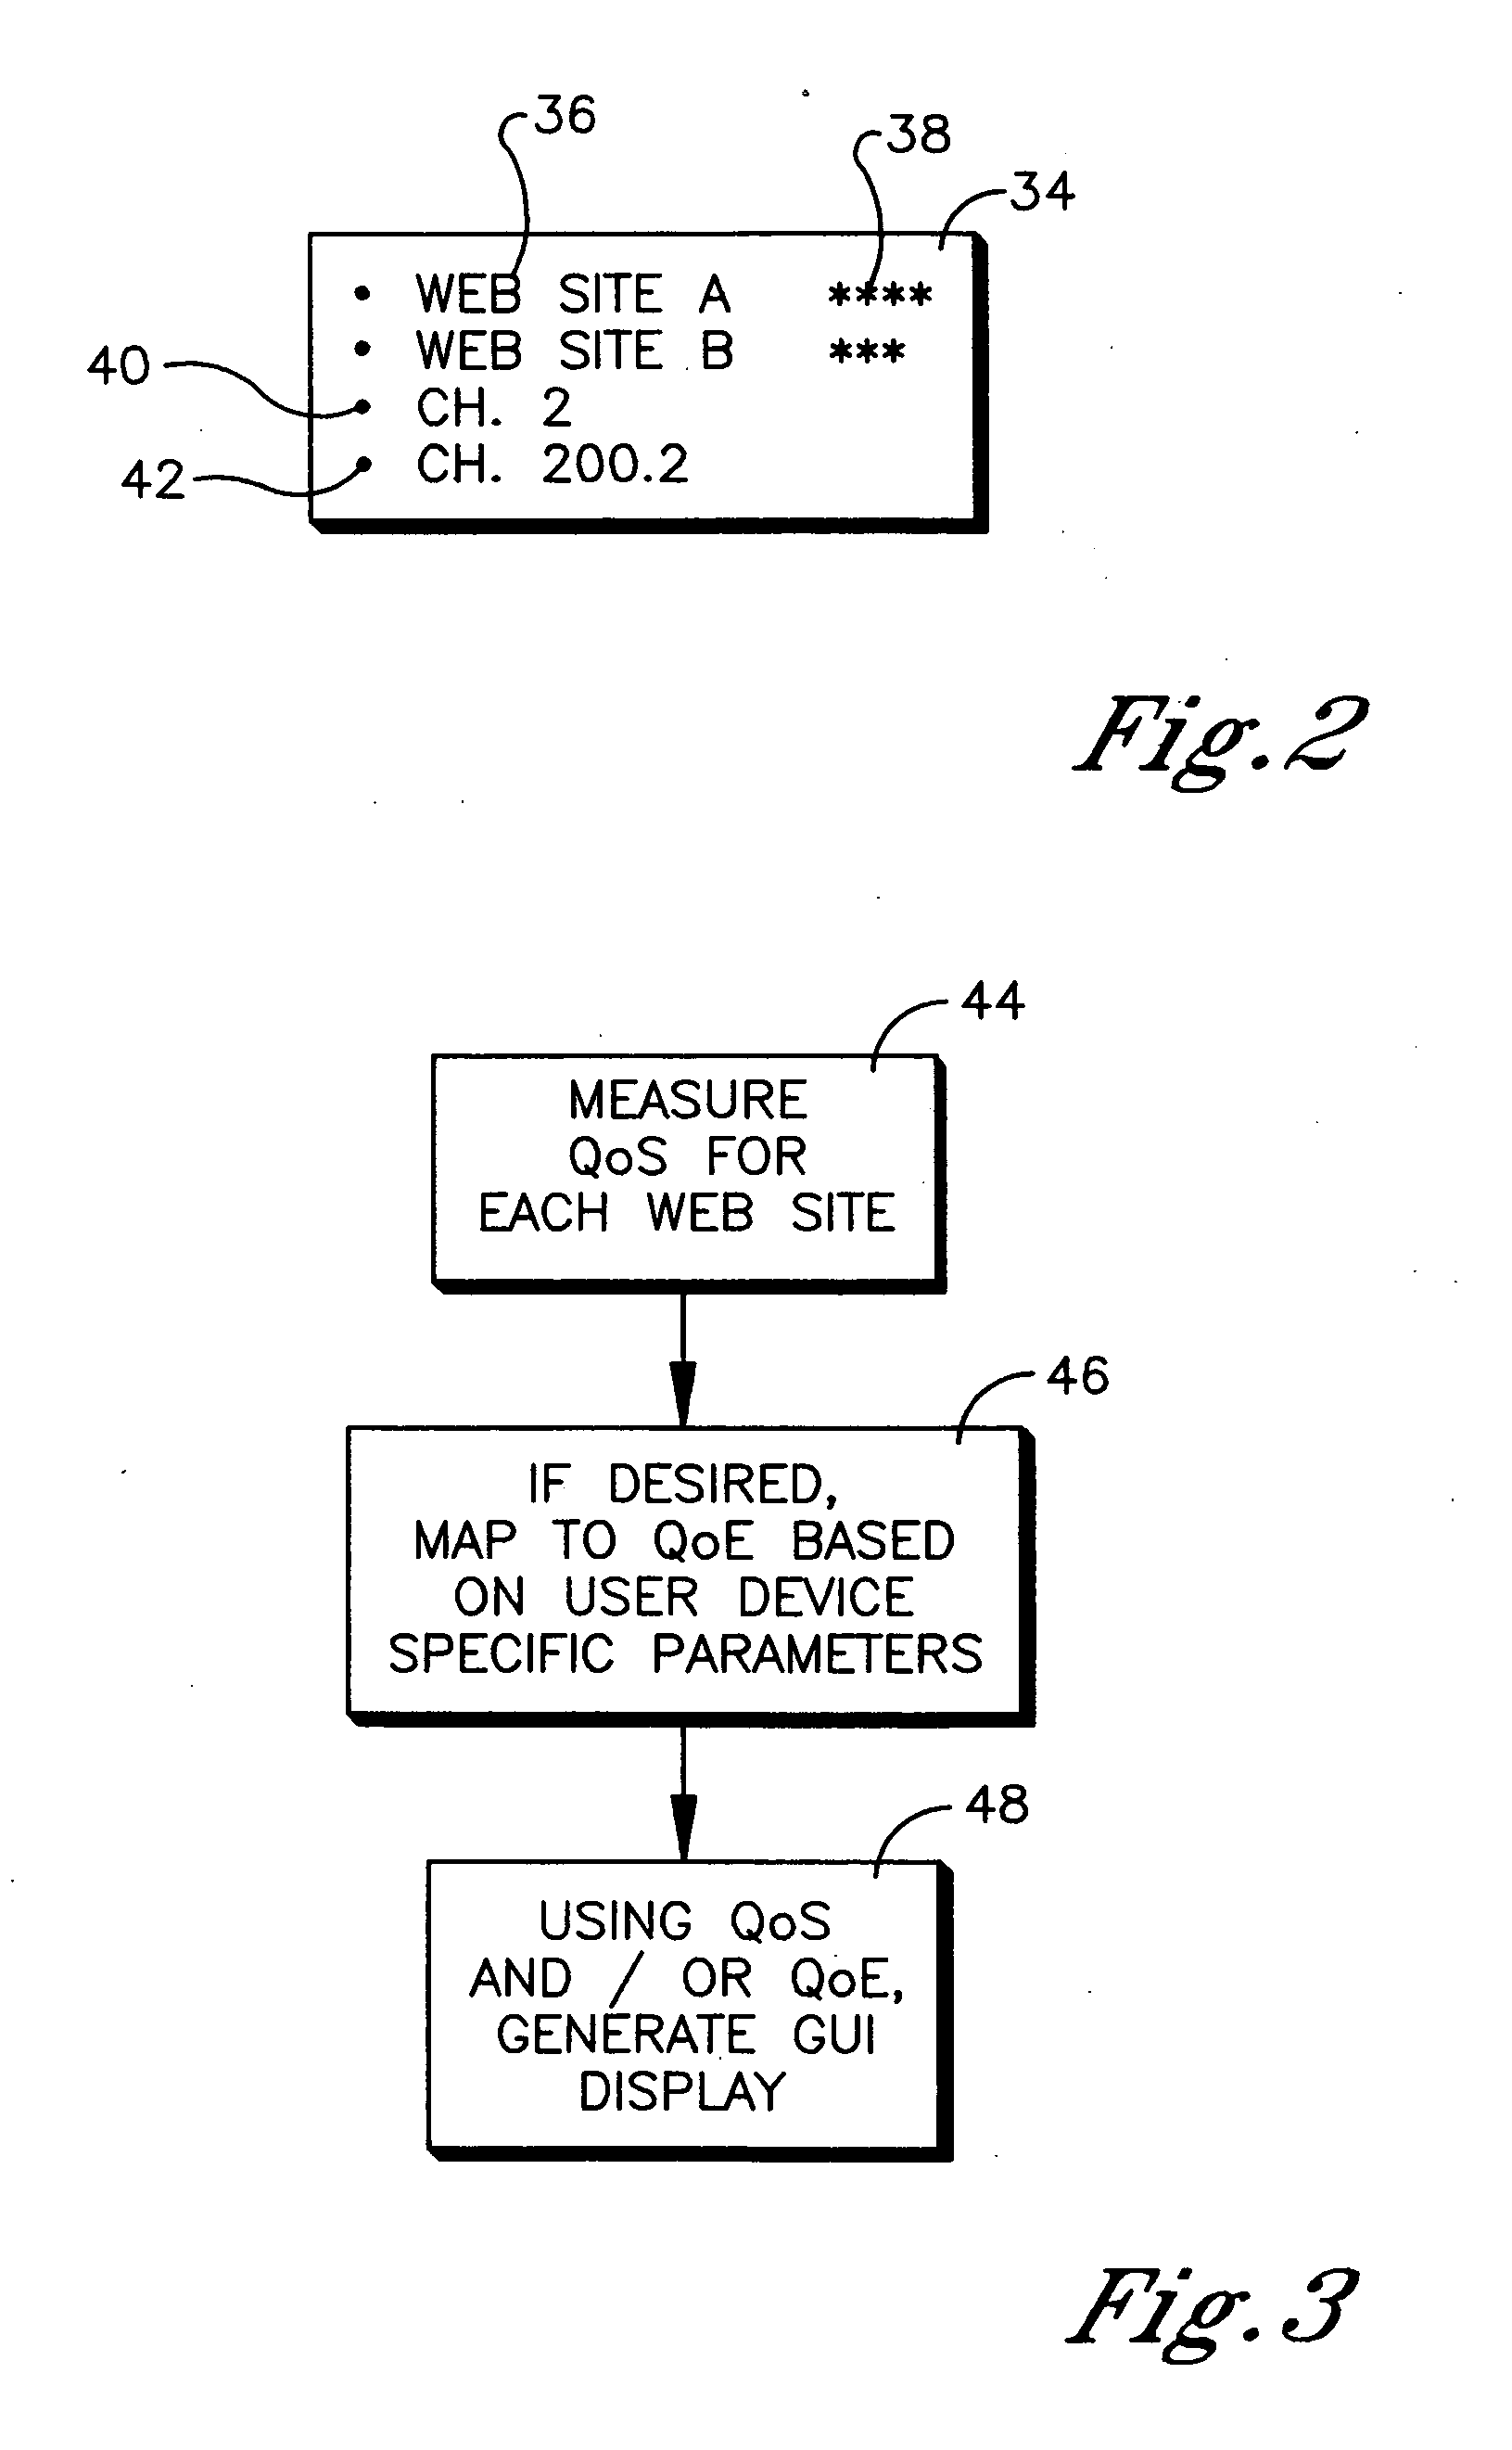 Method and system for providing recommendations for Internet content providers